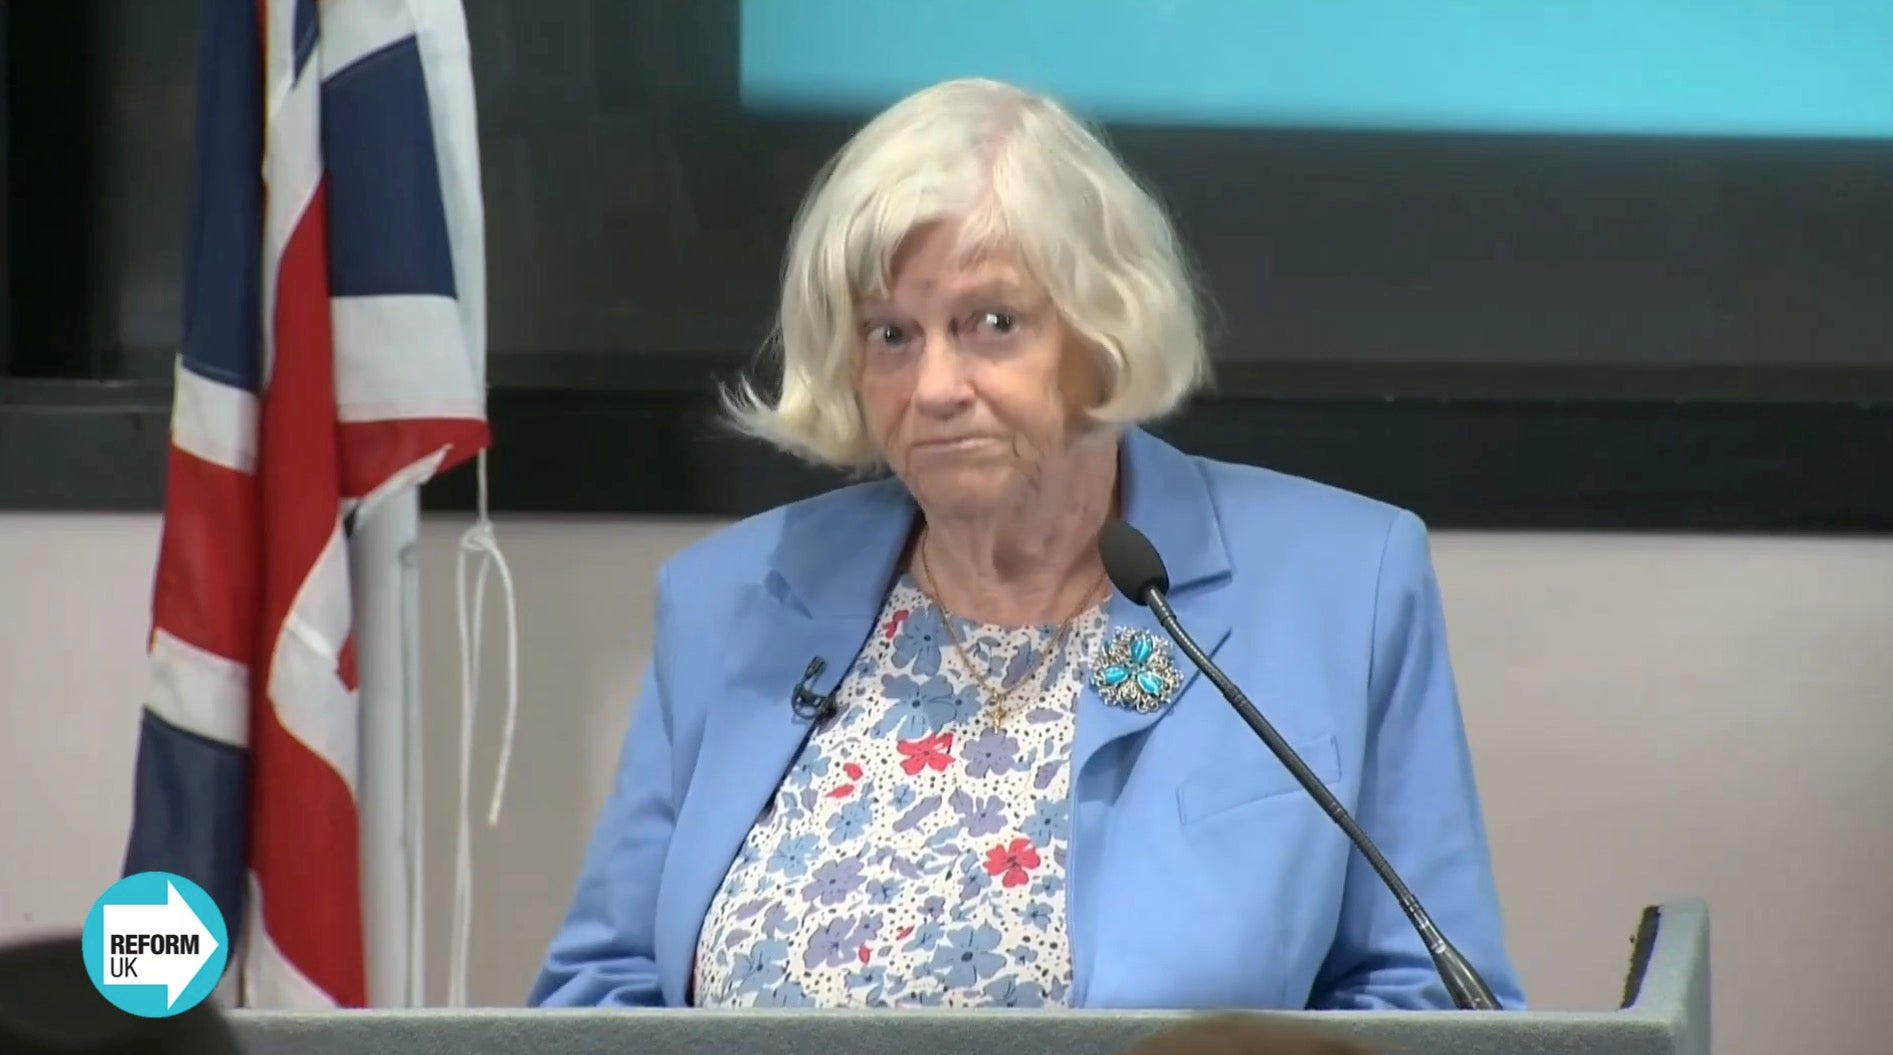 Ann Widdecombe is set to be deployed in Clacton